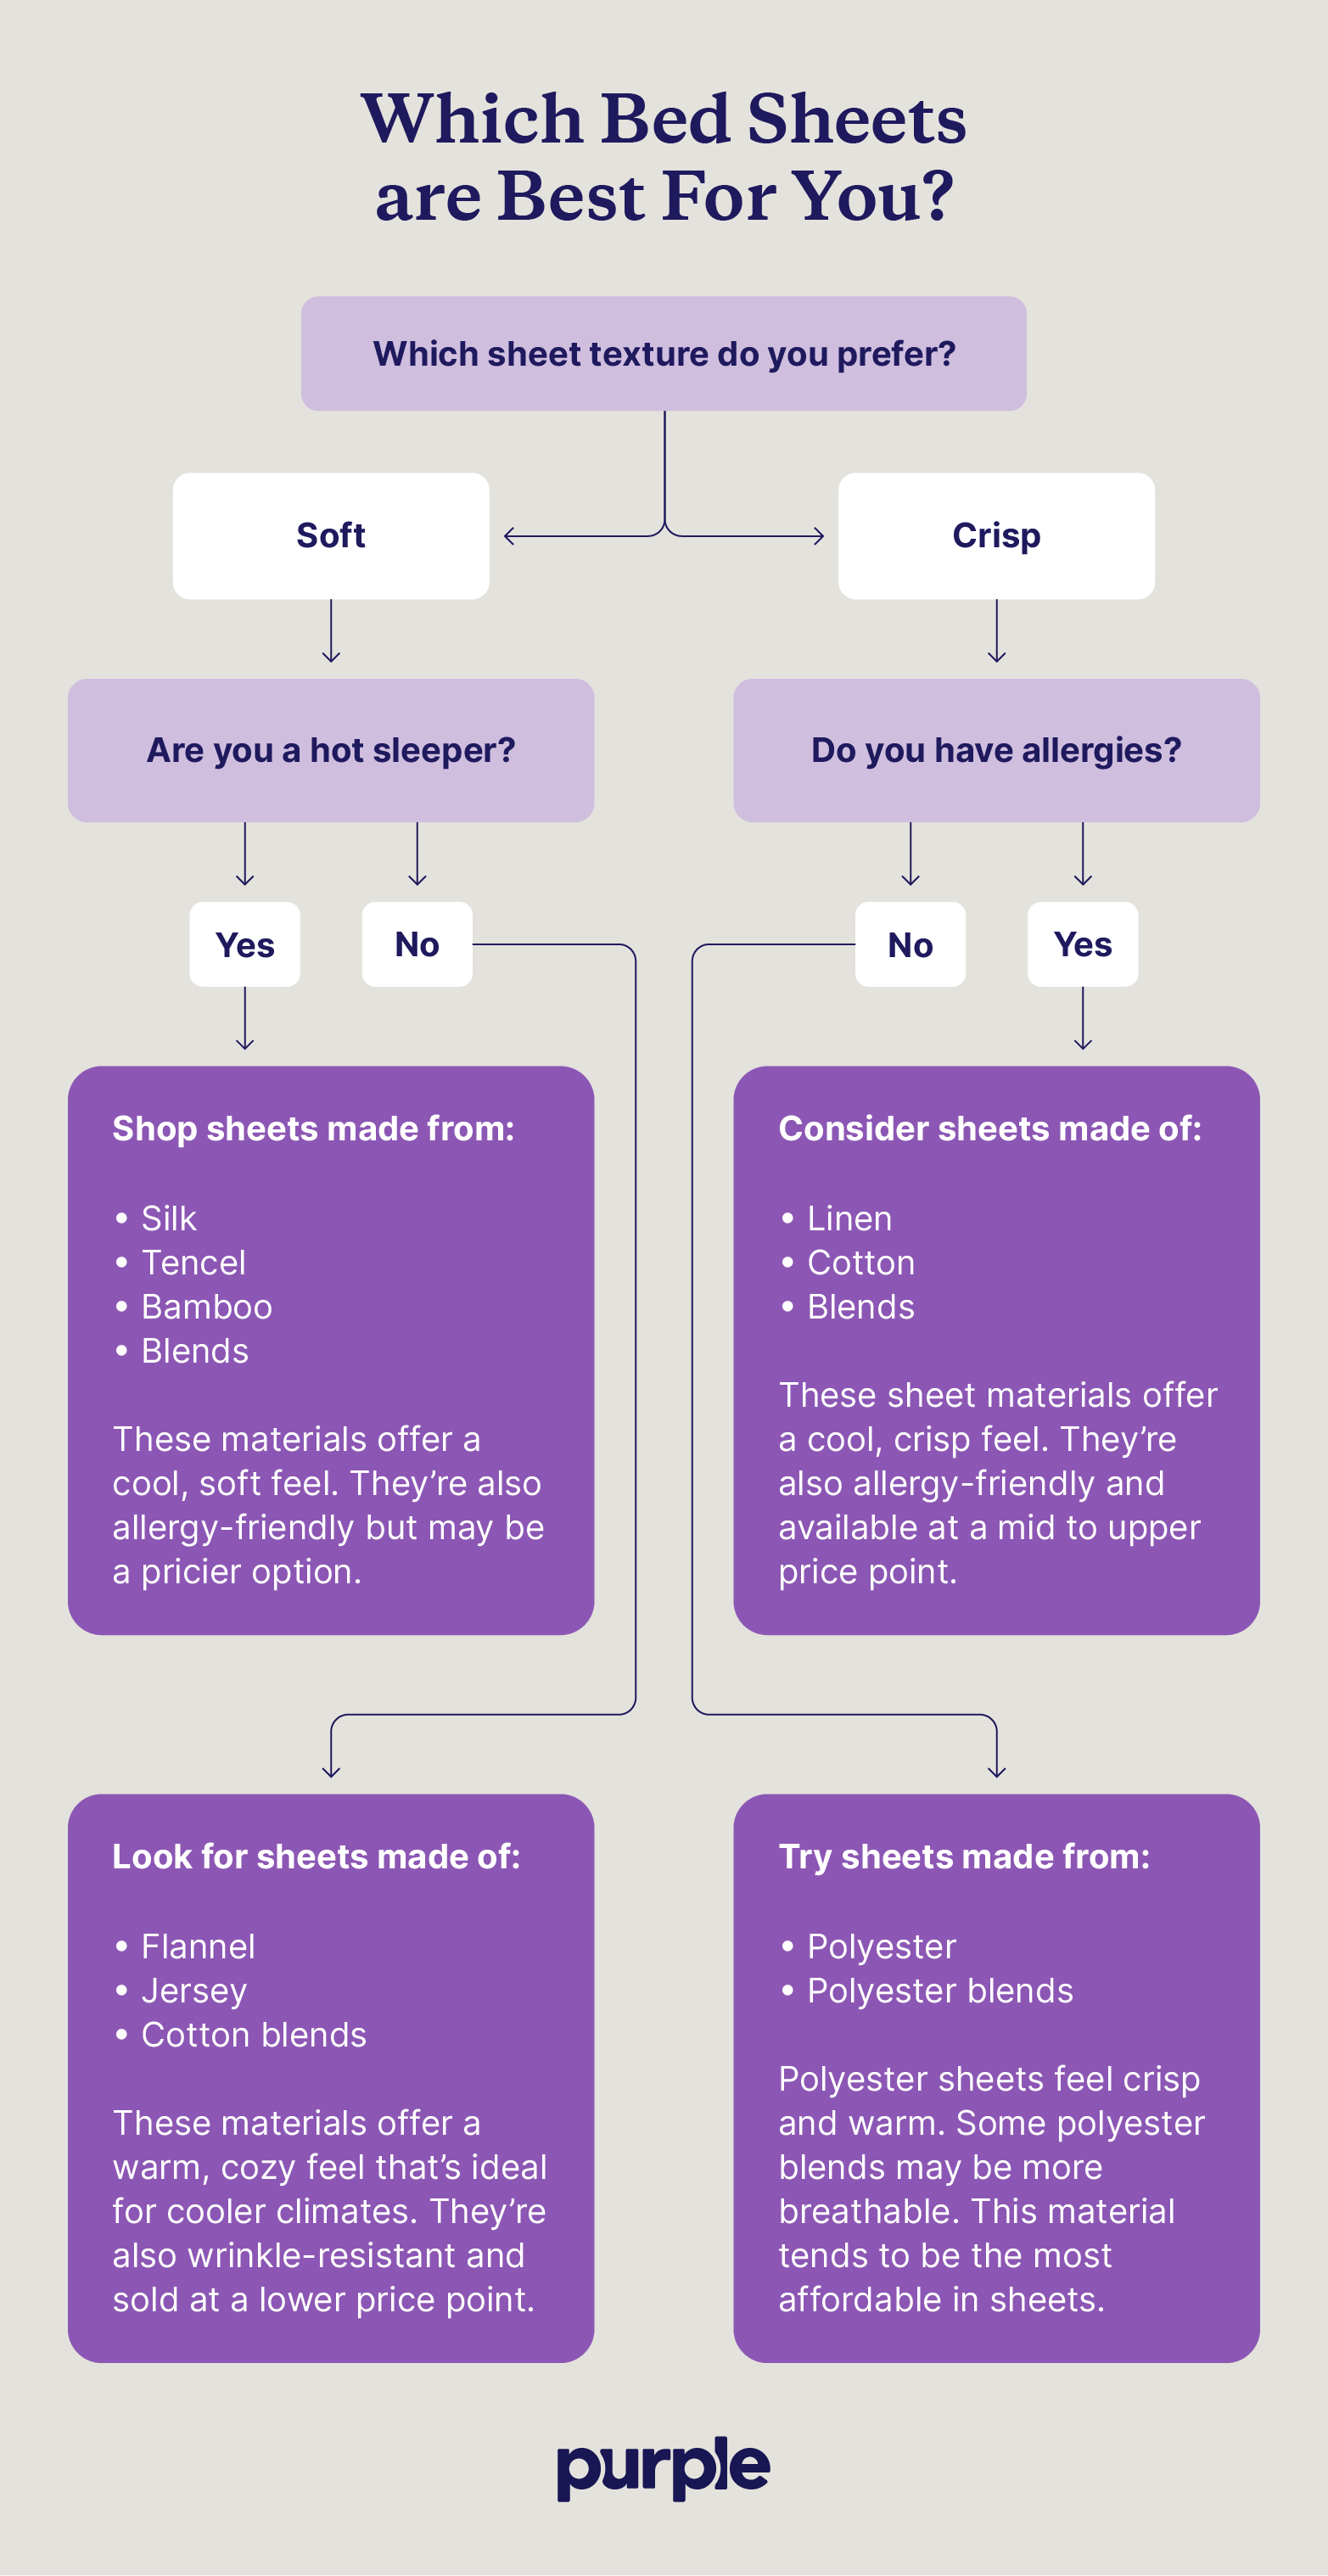 Flowchart illustrating how to choose bed sheets based on your personal preferences.